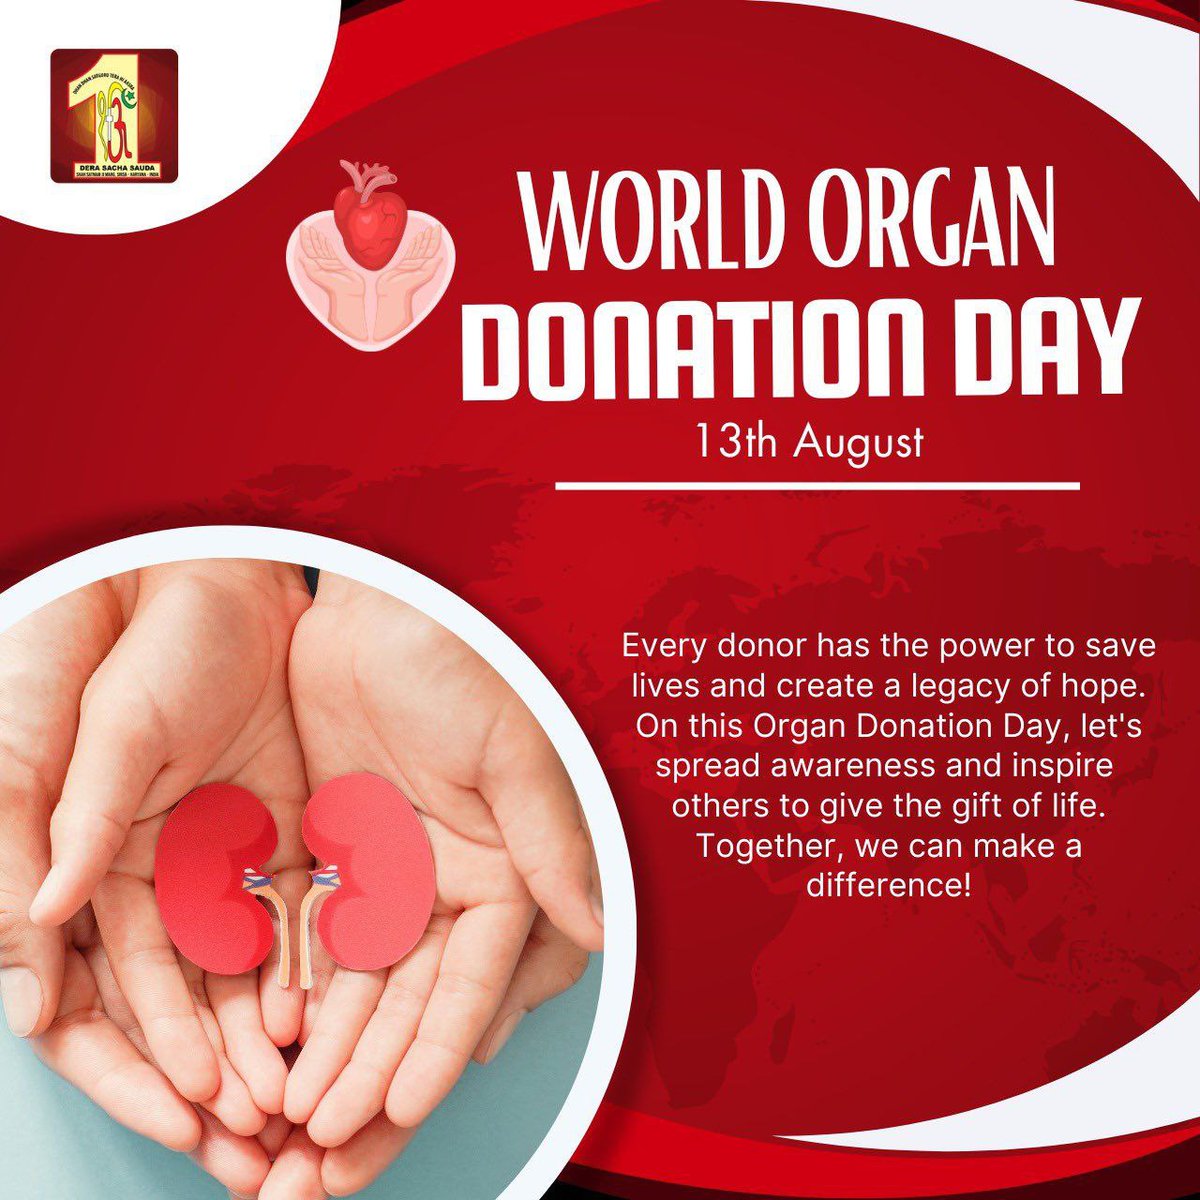 Every heartbeat is a chance to make a difference.
On #WorldOrganDonationDay, let's honor those who gift life's rhythm to others.
Become an organ donor and let's script stories of compassion that resonate through generations. 📜🕊️ #DonateHope